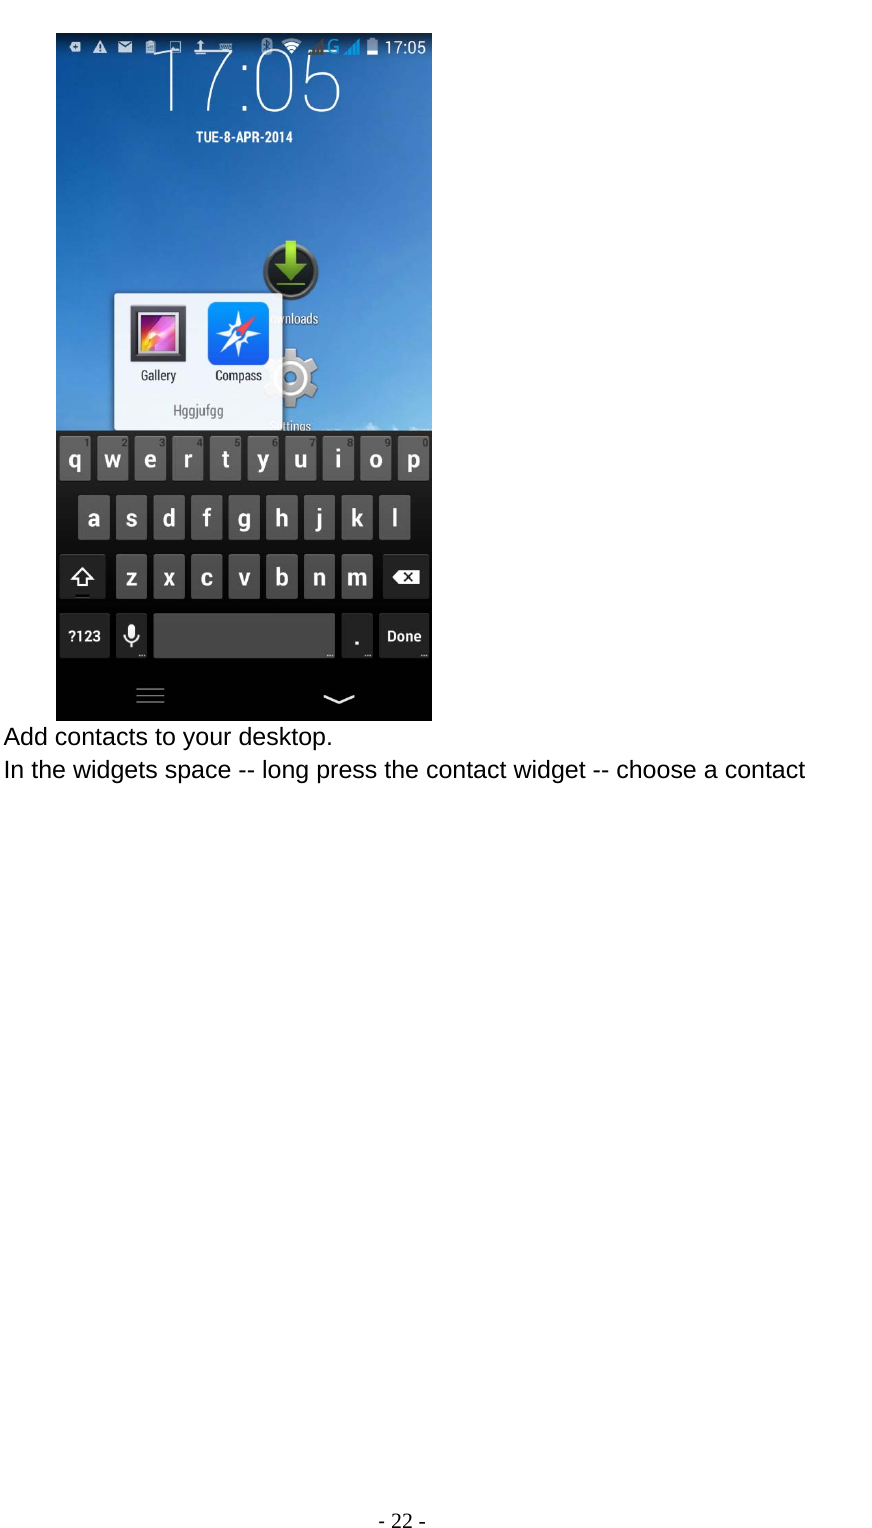                                          ‐ 22 -       Add contacts to your desktop. In the widgets space -- long press the contact widget -- choose a contact 